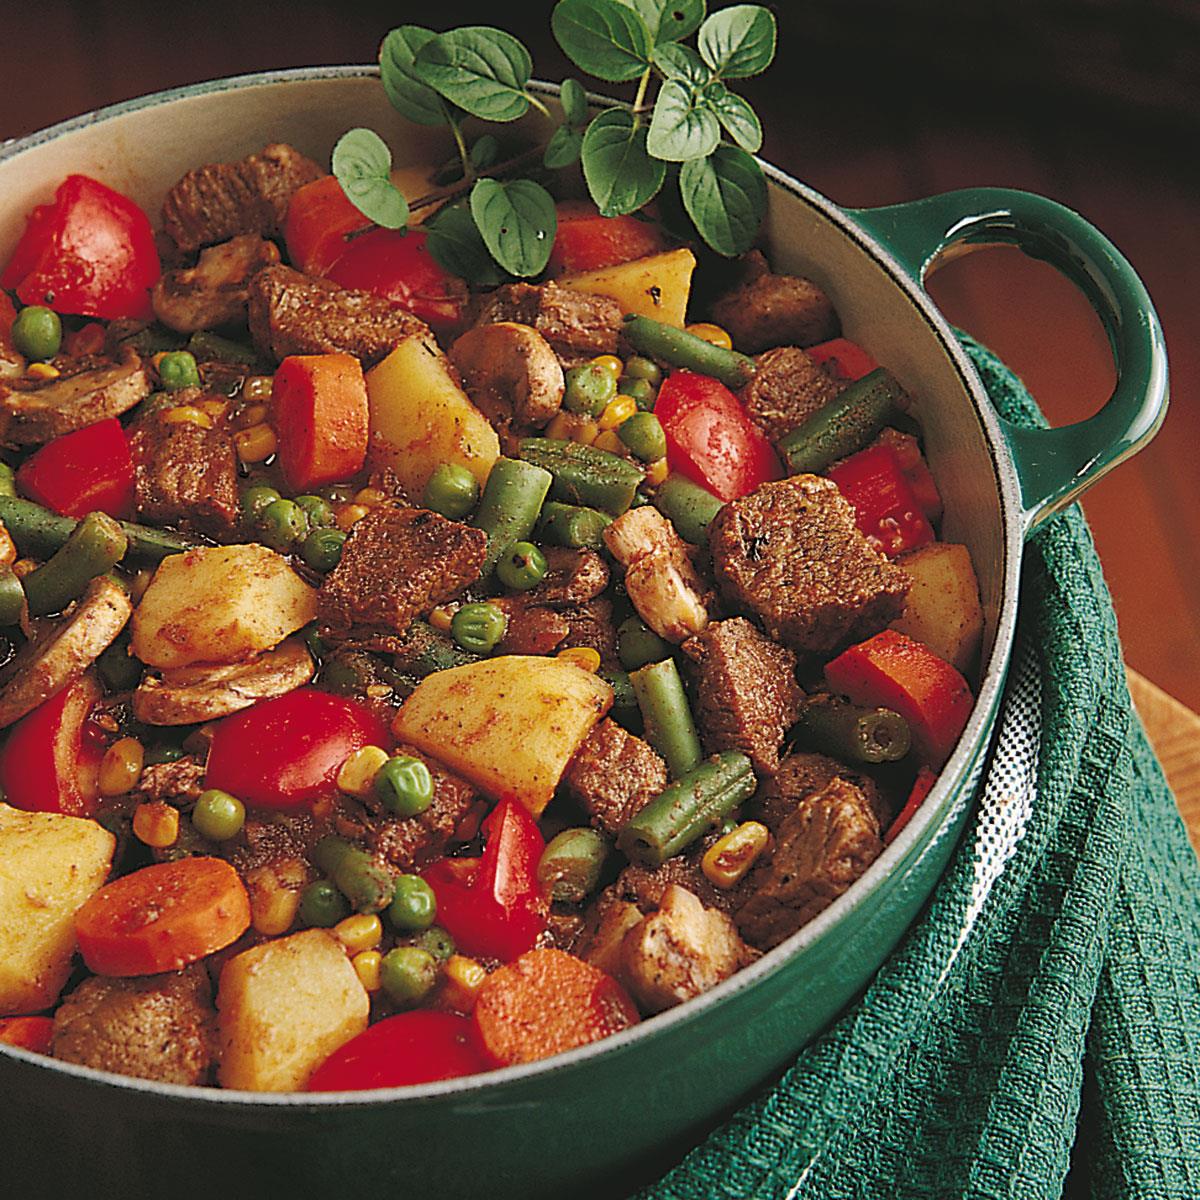 What Herbs Go In Beef Stew